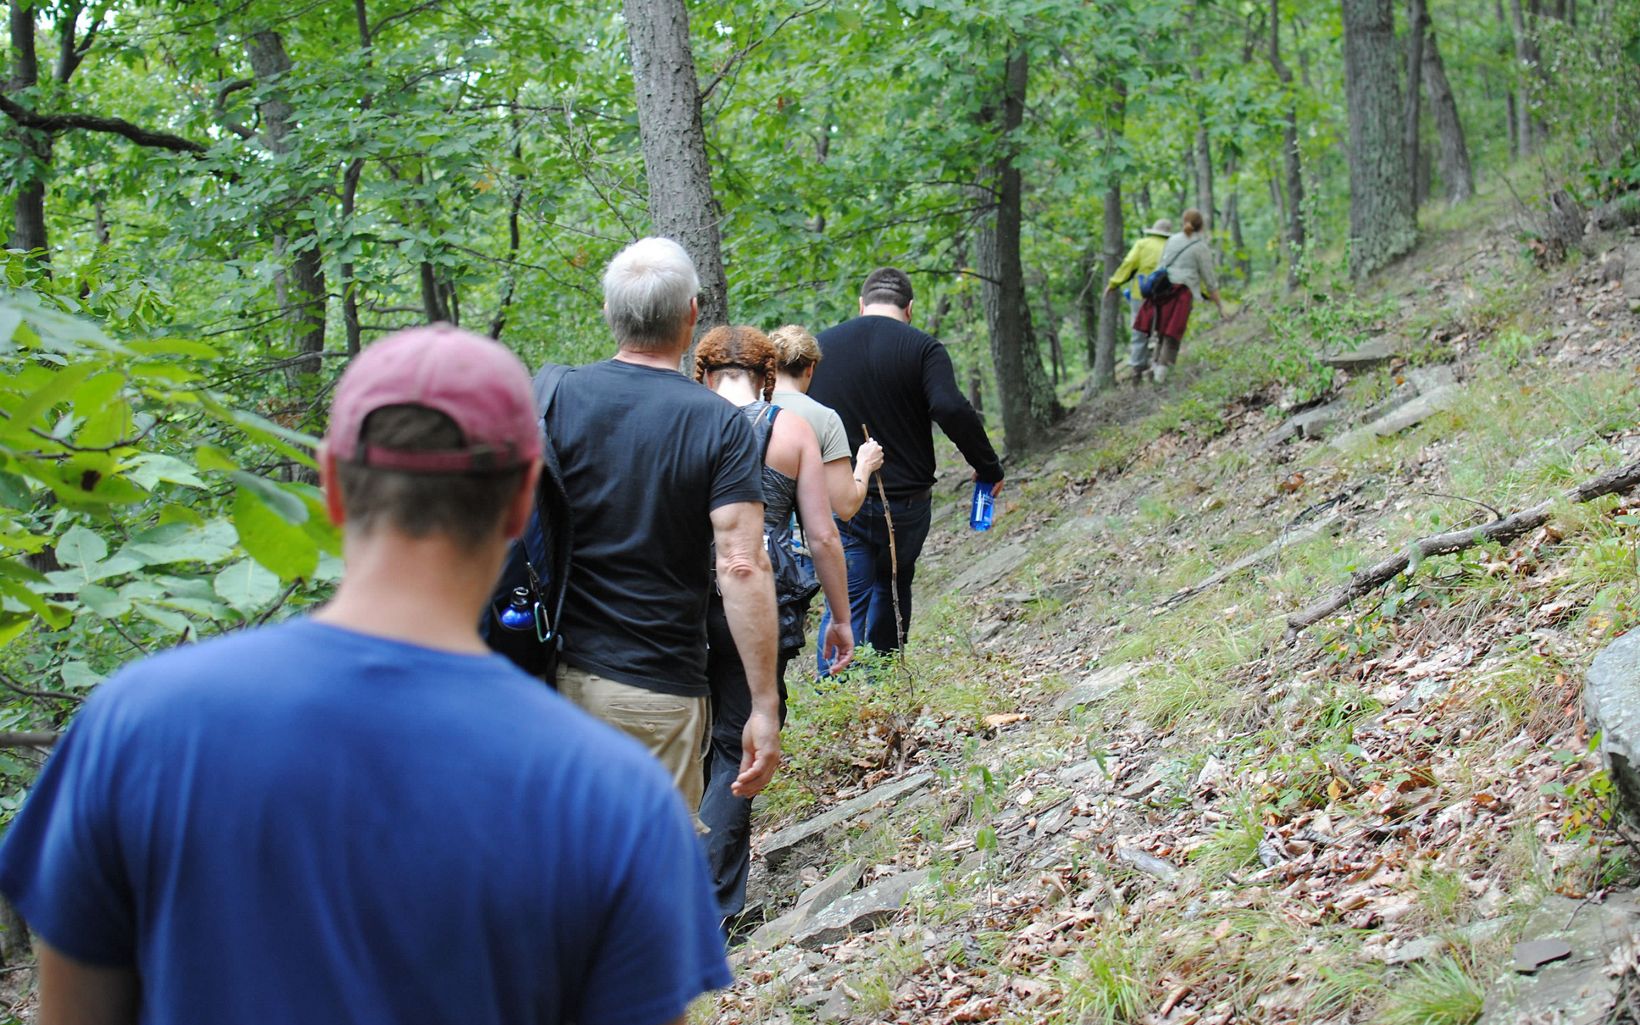 Seven people walk in a line along a narrow forest trail. To their left is a thick line of trees. To their right, the open ground rises in a steep grade.